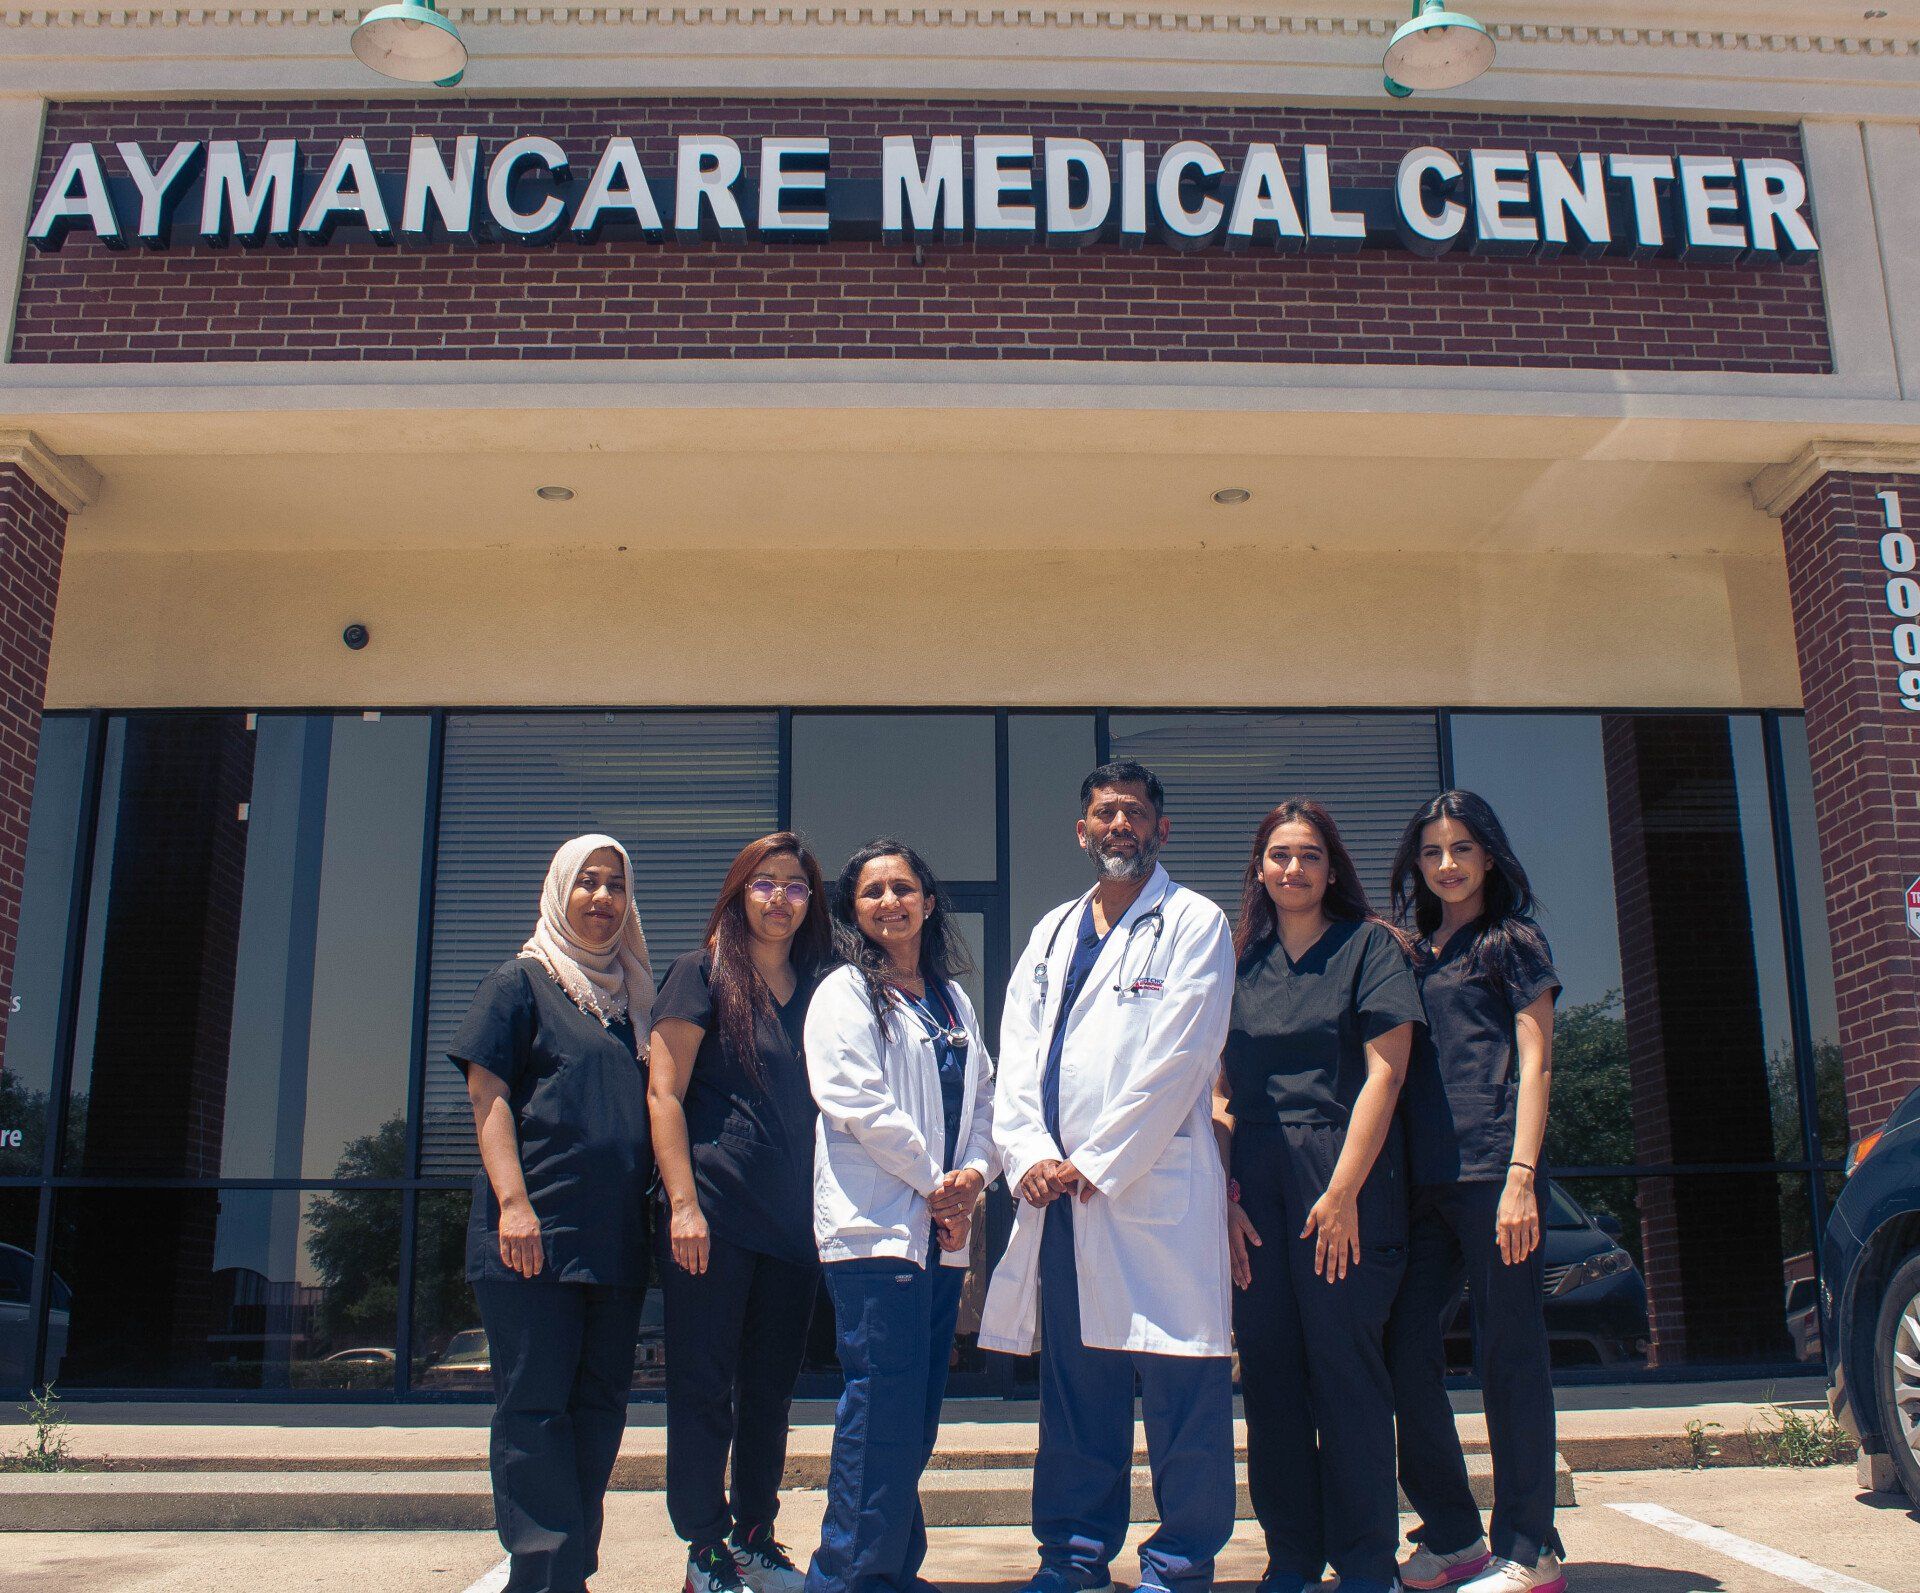 A group of doctors and nurses pose in front of the Aymancare Medical Center